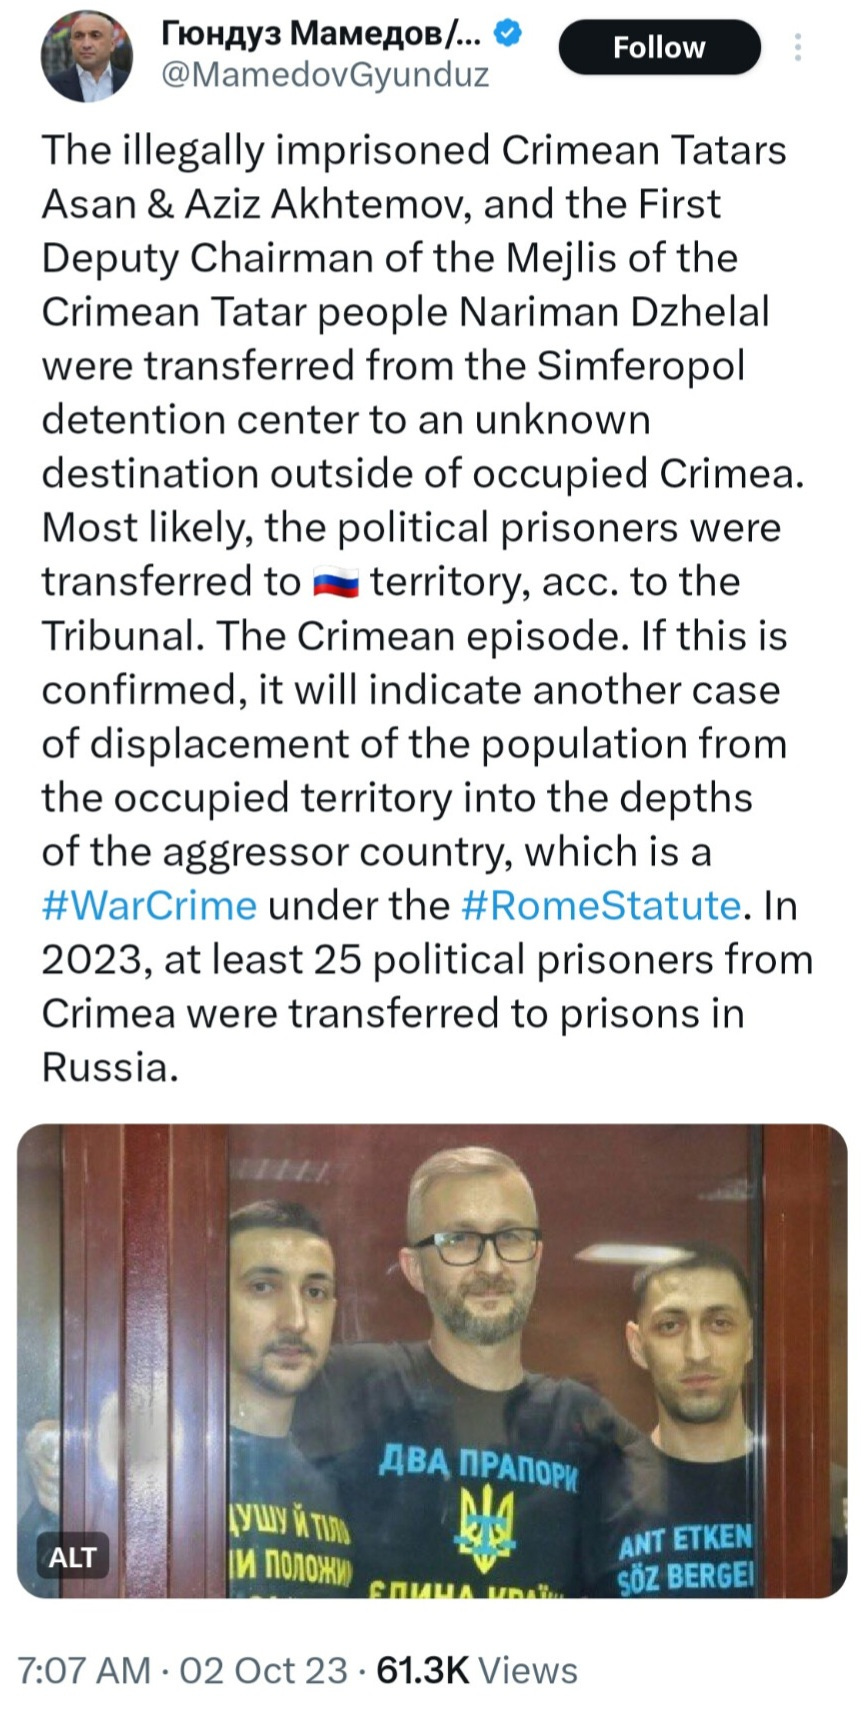 Tweet from Mamedov Gunduz. The illegally imprisoned Crimean Tartars Asan and Aziz Akhtemov, and the First Deputy Chairman of the Mejlis of the Crimean Tartar people Nariman Dzhelal were transferred from the Simferopol detention center to an unknown destination outside of occupied Crimea. Most likely, the political prisoners were transferred to Russian territory, according to the Tribunal. The Crimean episode. If this is confirmed, it will indicate another case of displacement of the population from the occupied territory into the depths of the aggressor country, which is a war crime under the Rome Statue. In 2023, at least 25 political prisoners from Crimea were transferred to prisons in Russia. Posted at 7:07 A.M. on 02 October 2023.